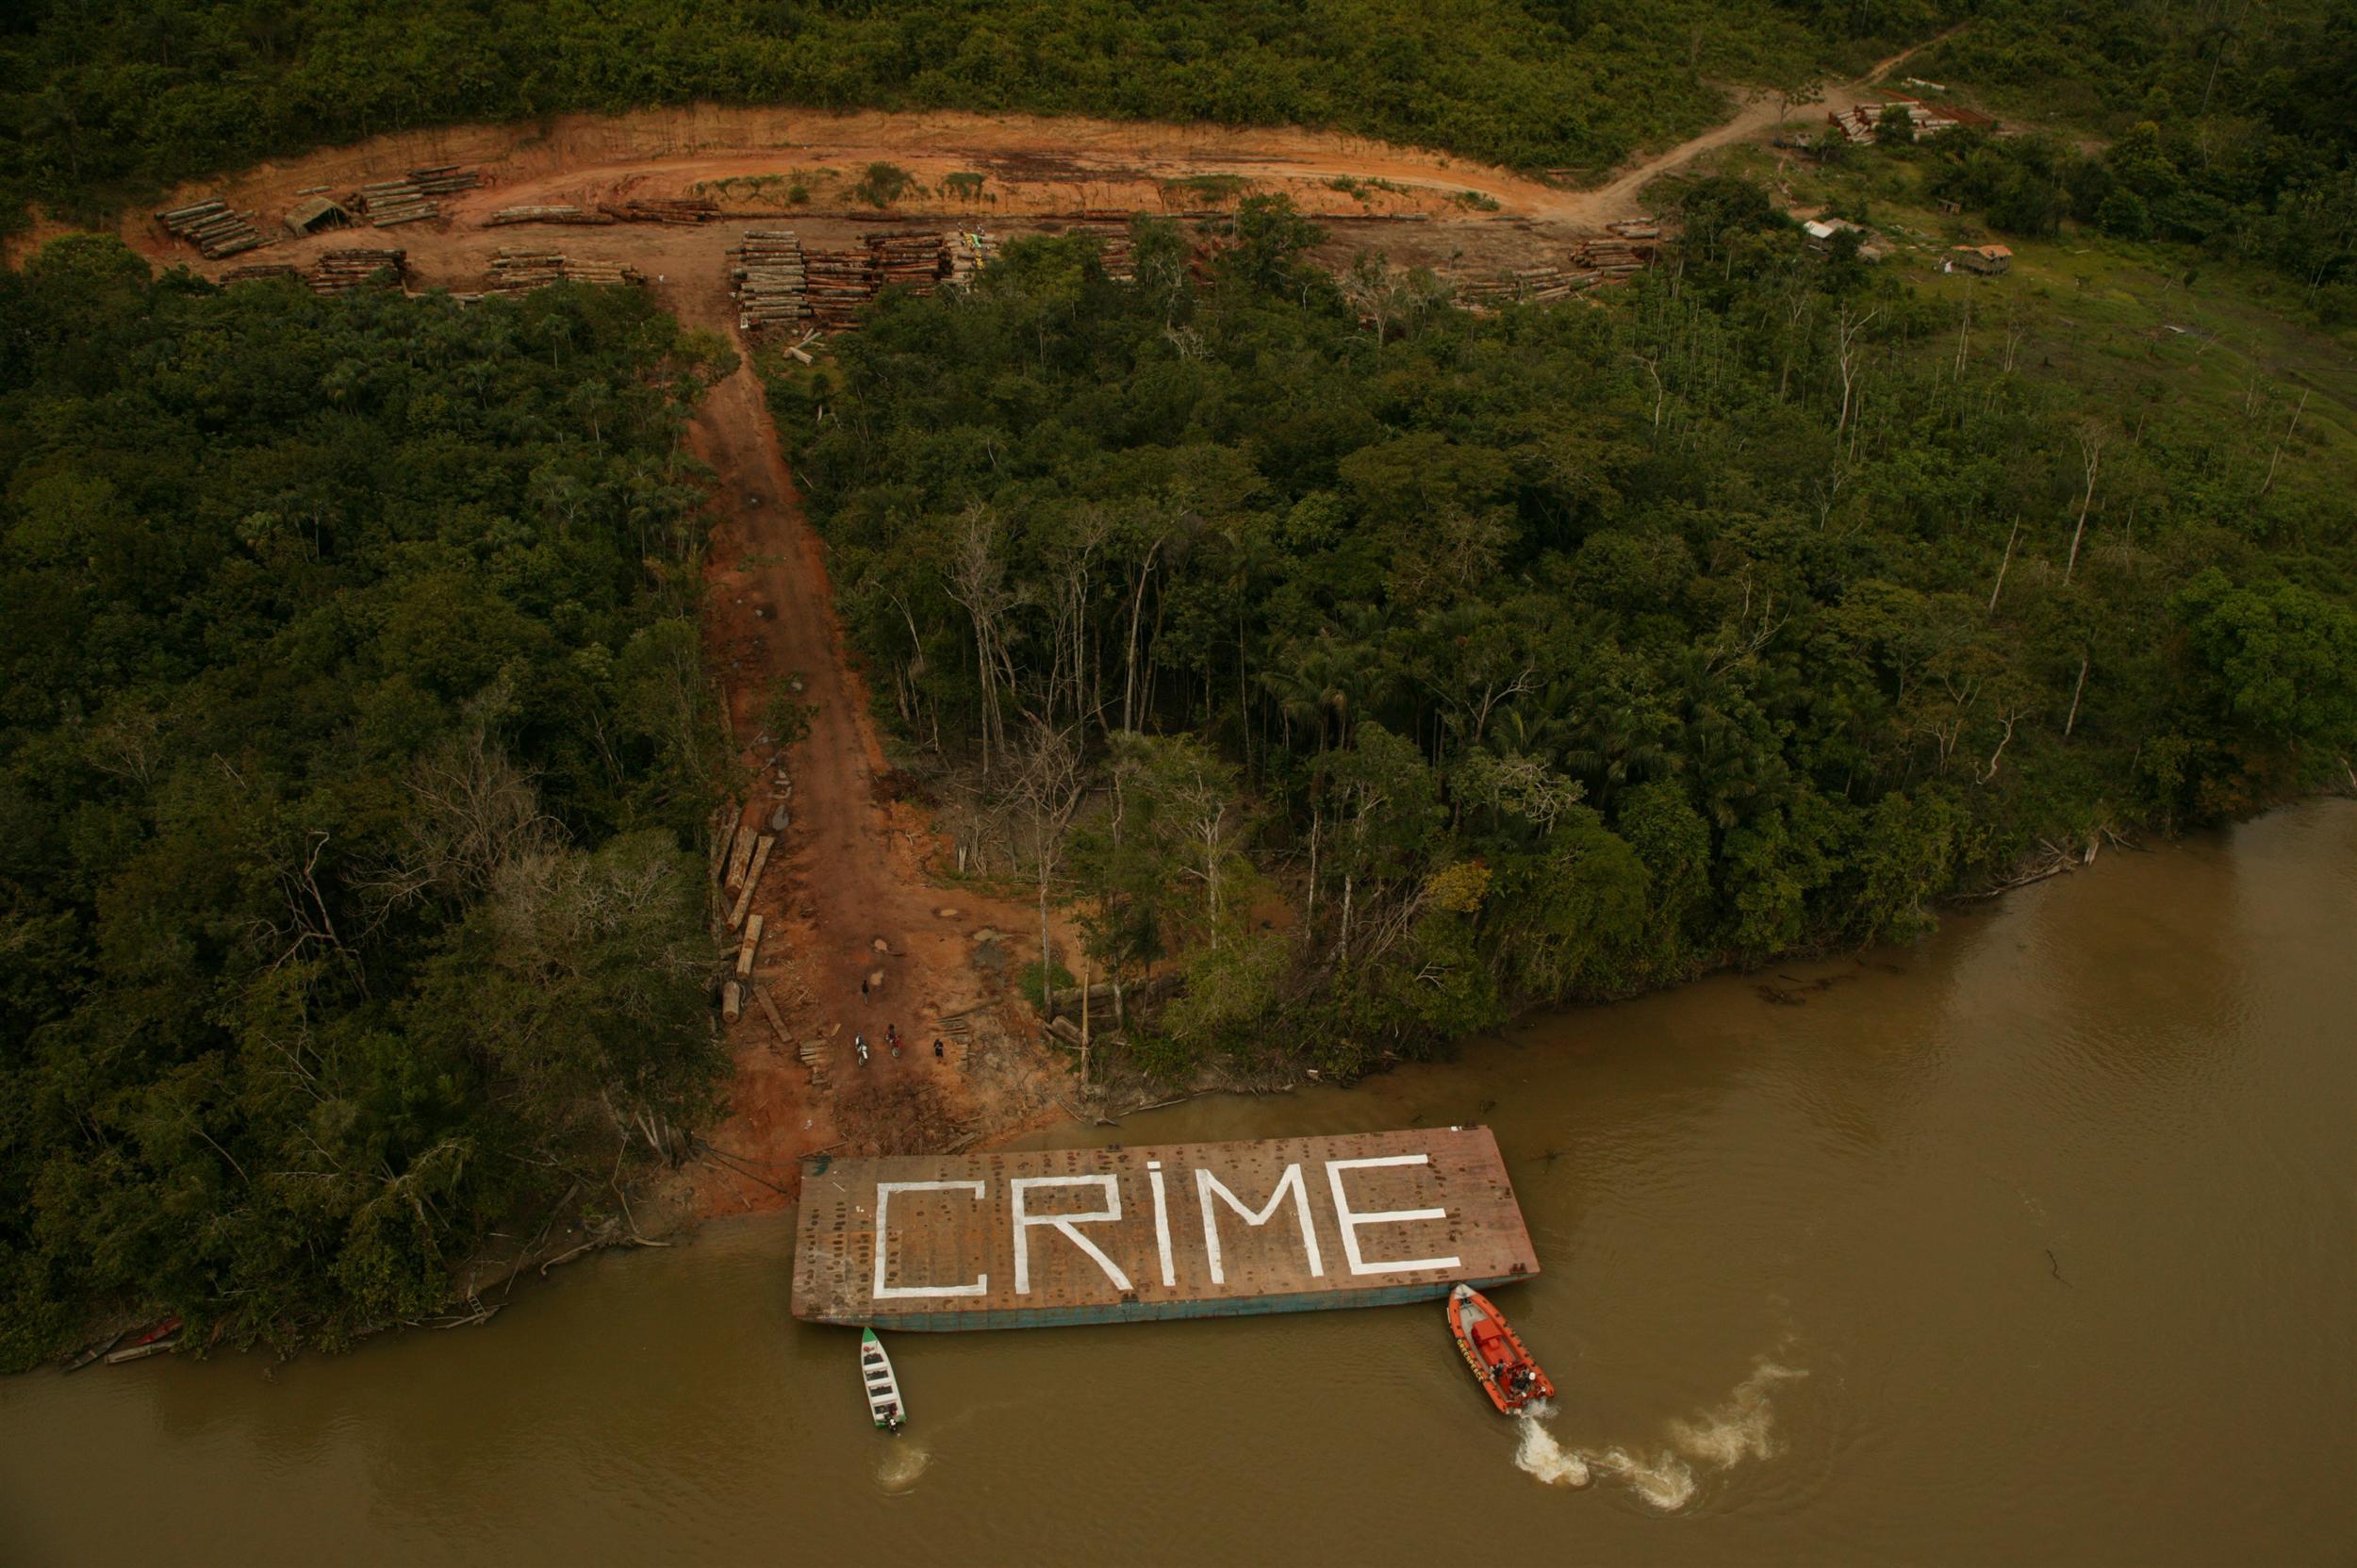 Greenpeace discovers an illegal logging operation with at least 200km of roads serving the operation. Greenpeace activists paint the loggers barge with the message 'CRIME' then uses it to blockade access to the sort yard. A massive amount of logs has already been transported by barge down river.Greenpeace informed Ibama (Brazilian environmental agents) of the discovery.